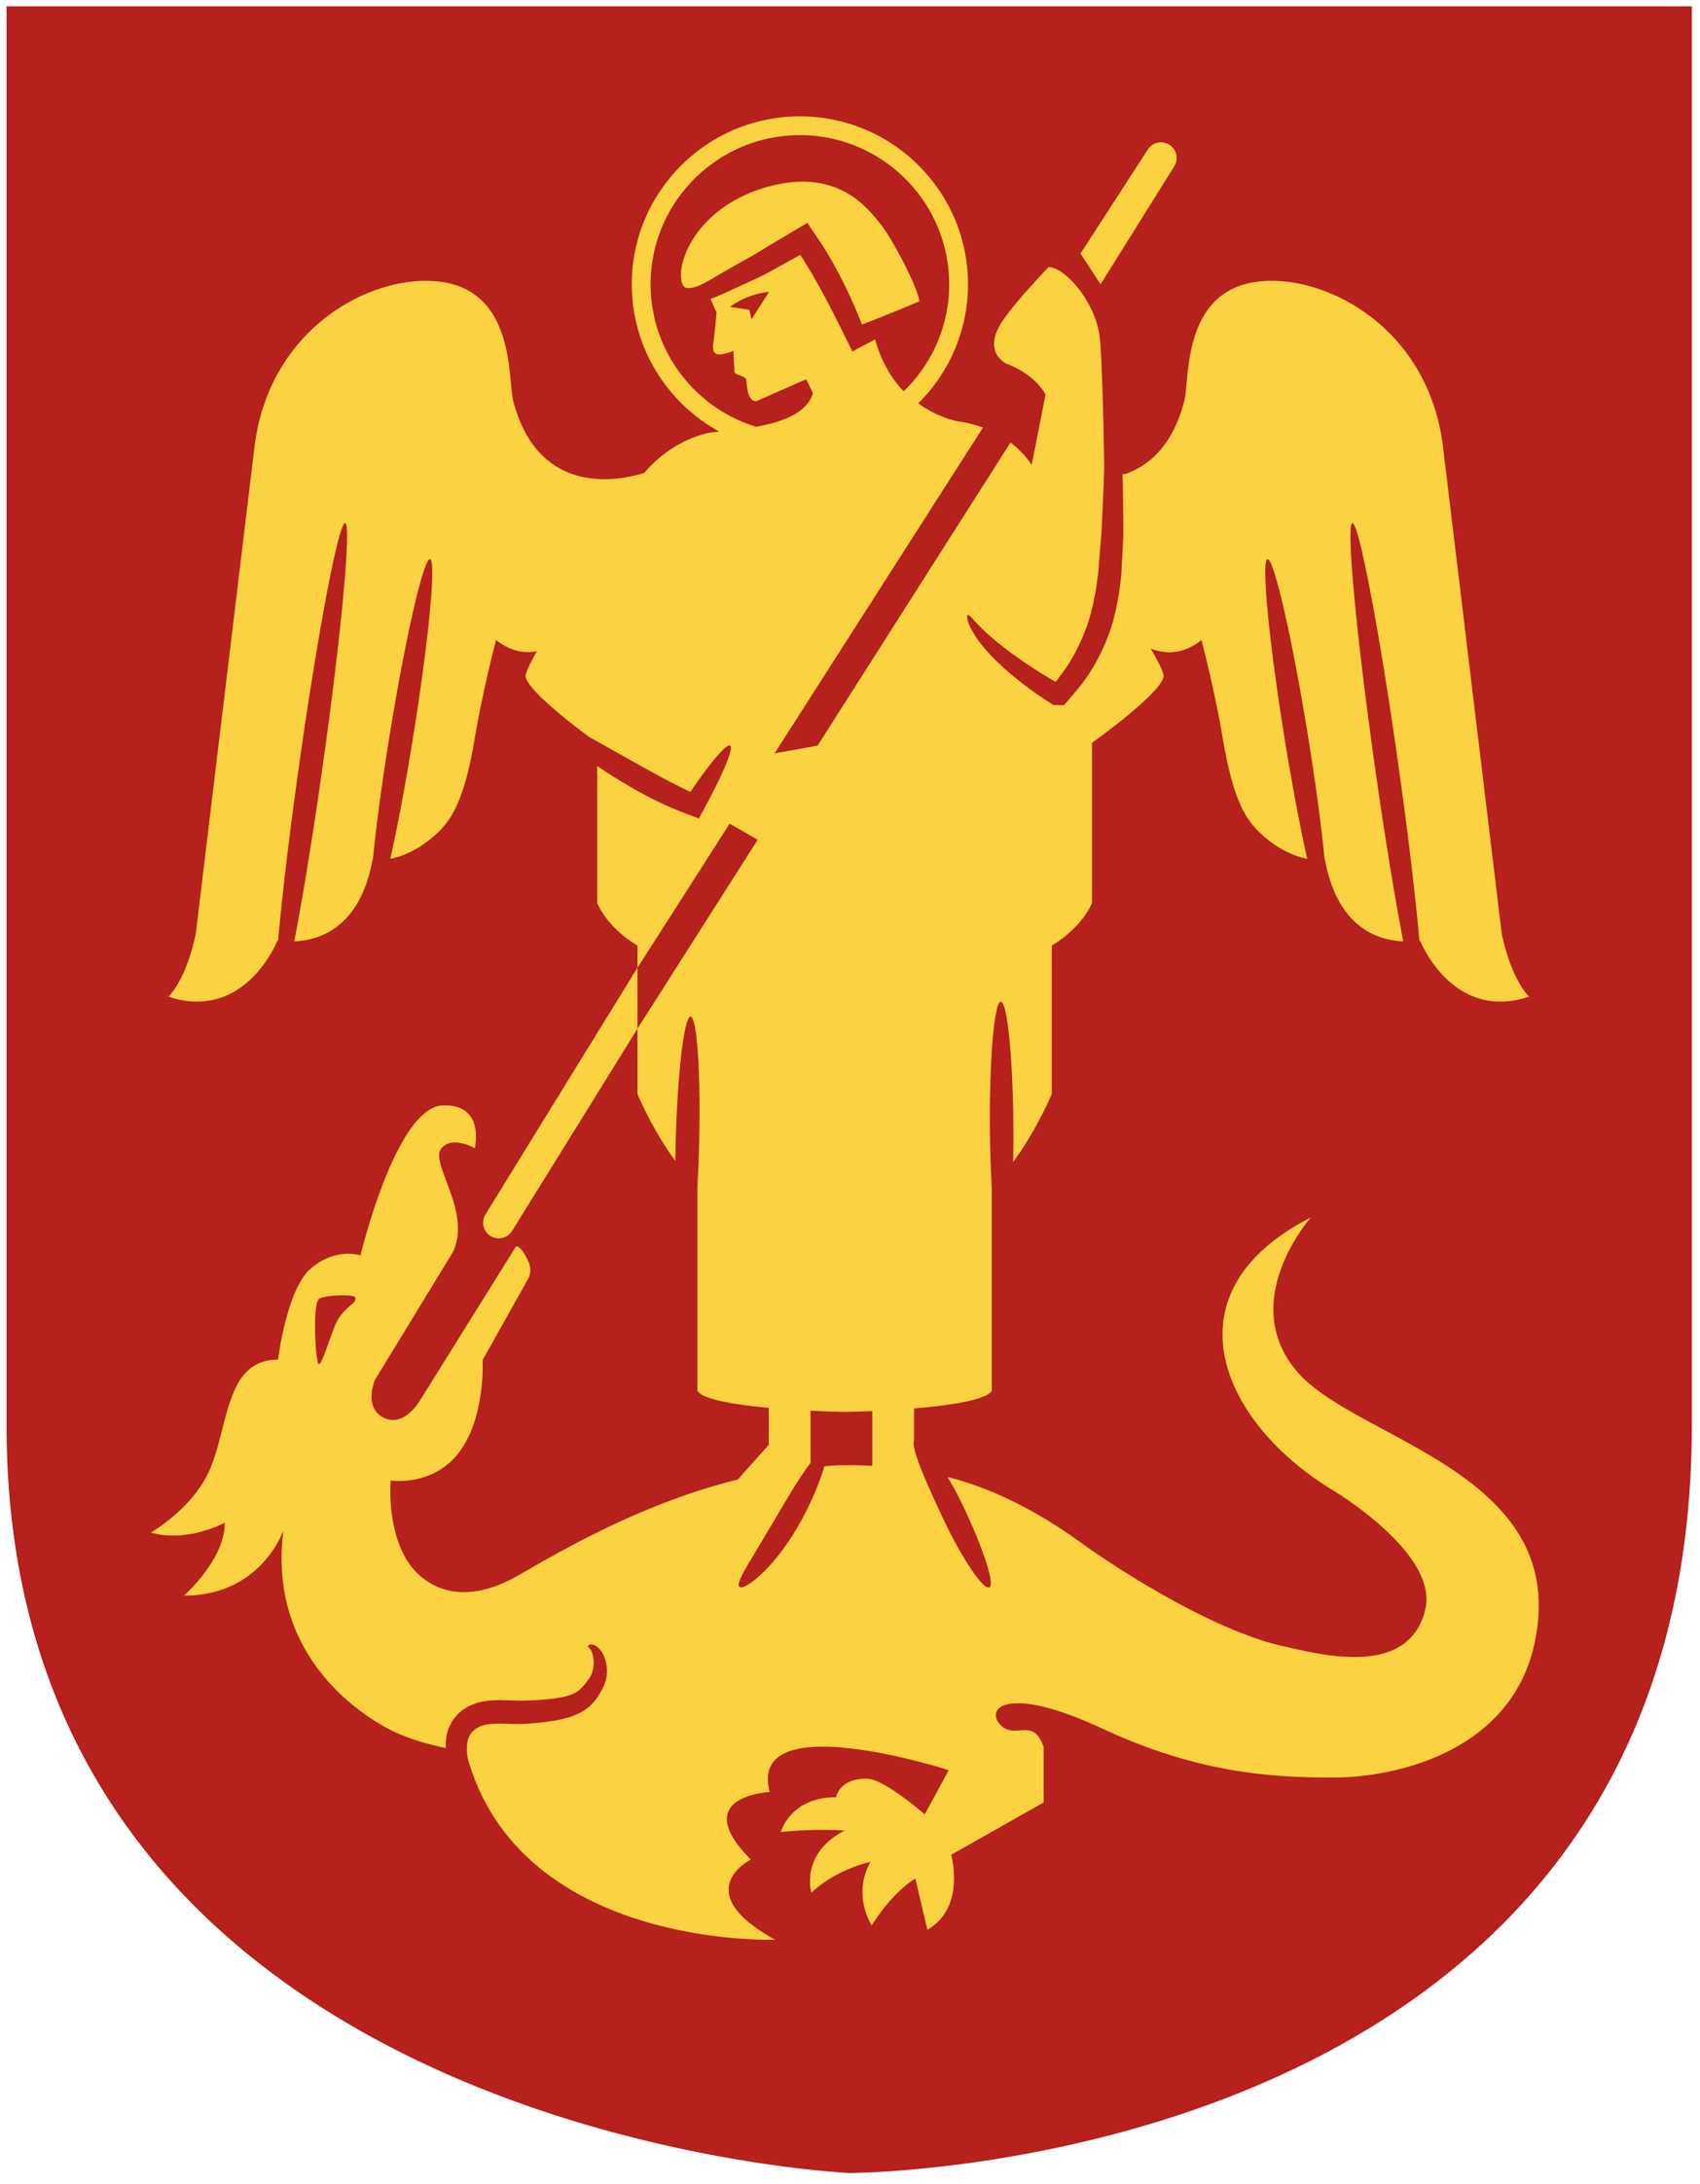 Illustration for a crest Mora Kommun with S:t Mikael and a dragon.